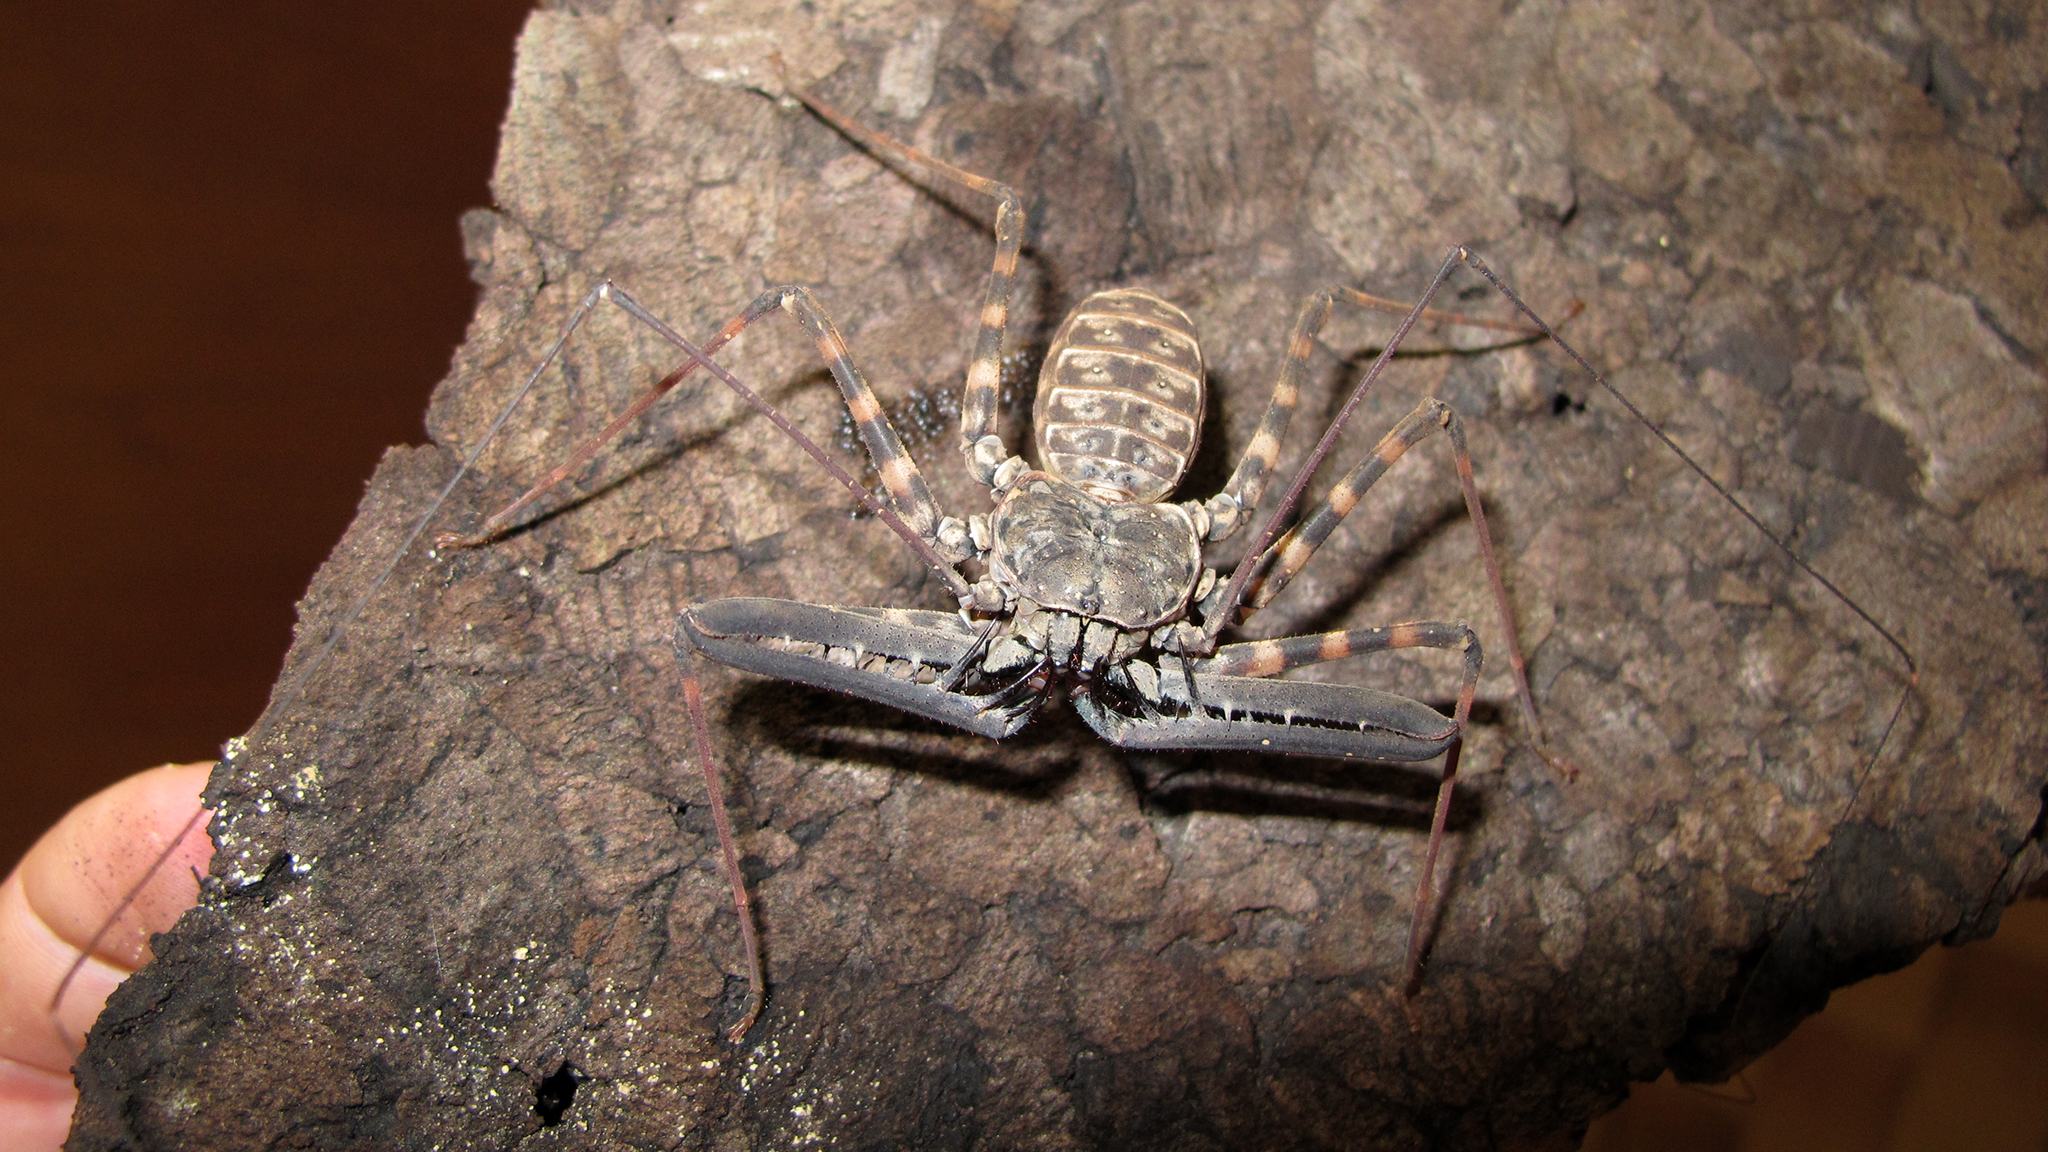 Charon species – Amblypygi – whip spiders